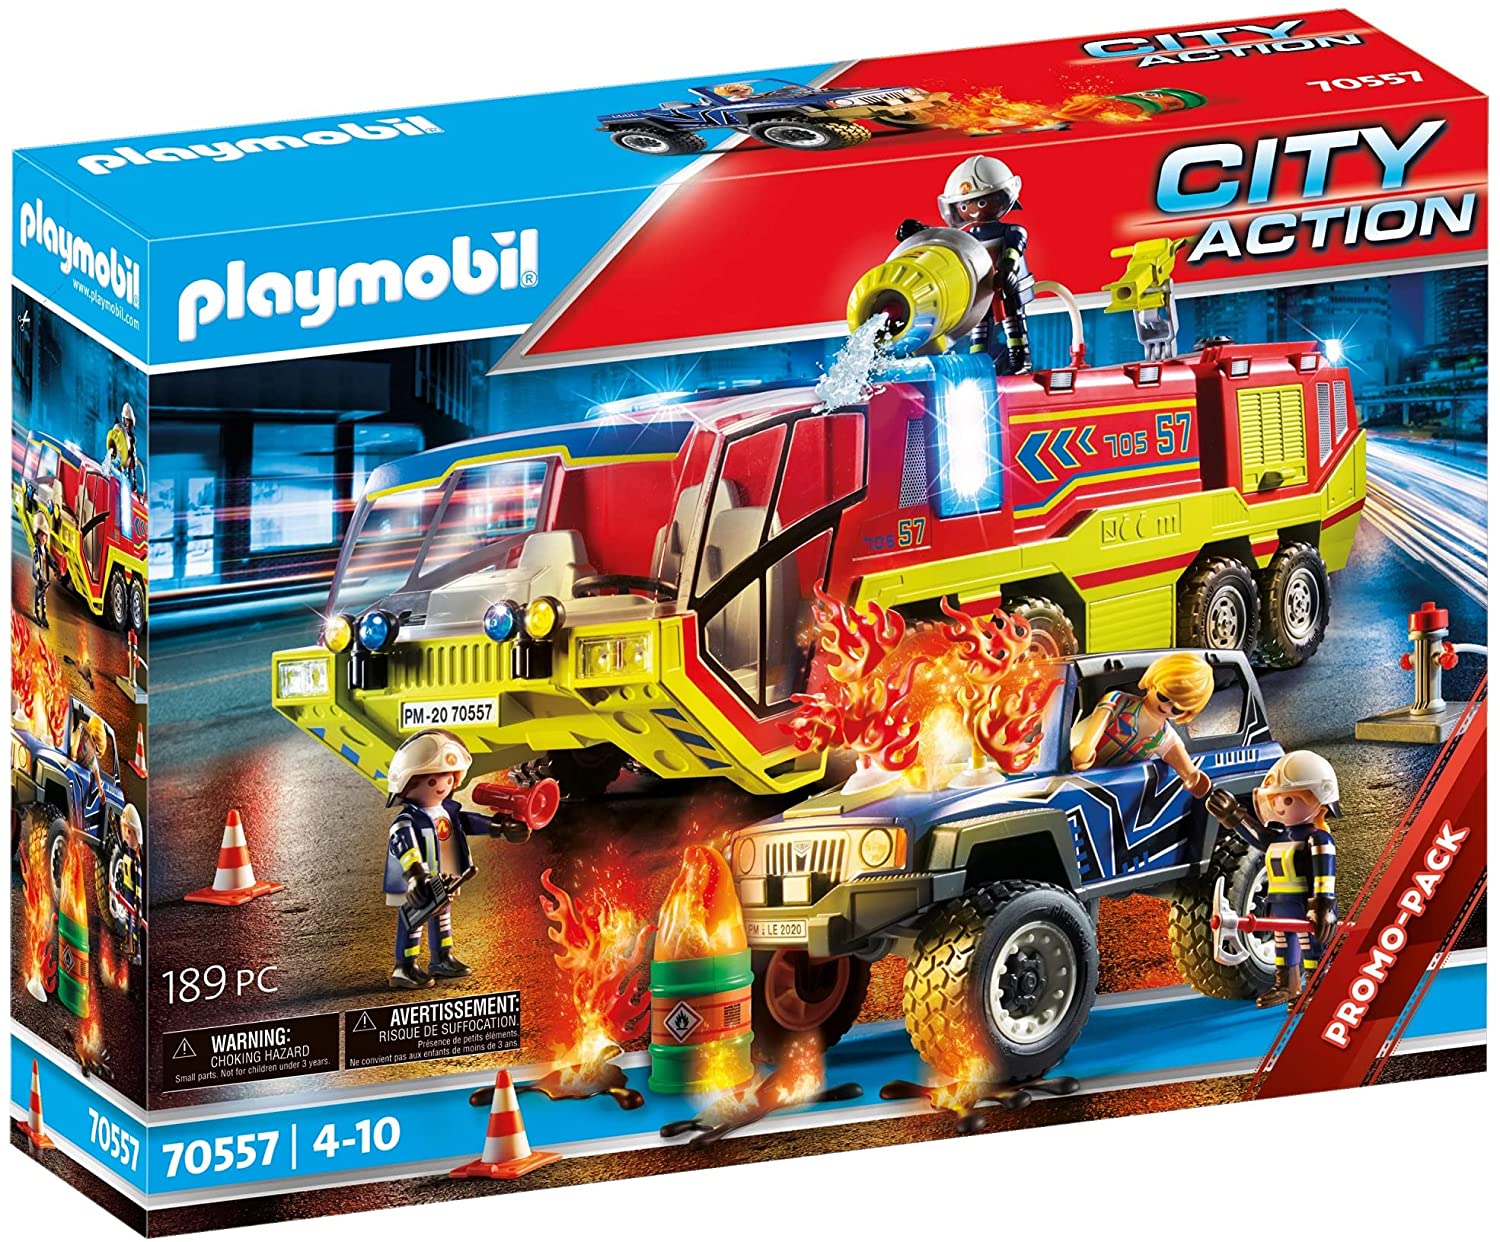 Playmobil City Action 70557 Fire Engine with Fire Engine Including Light an